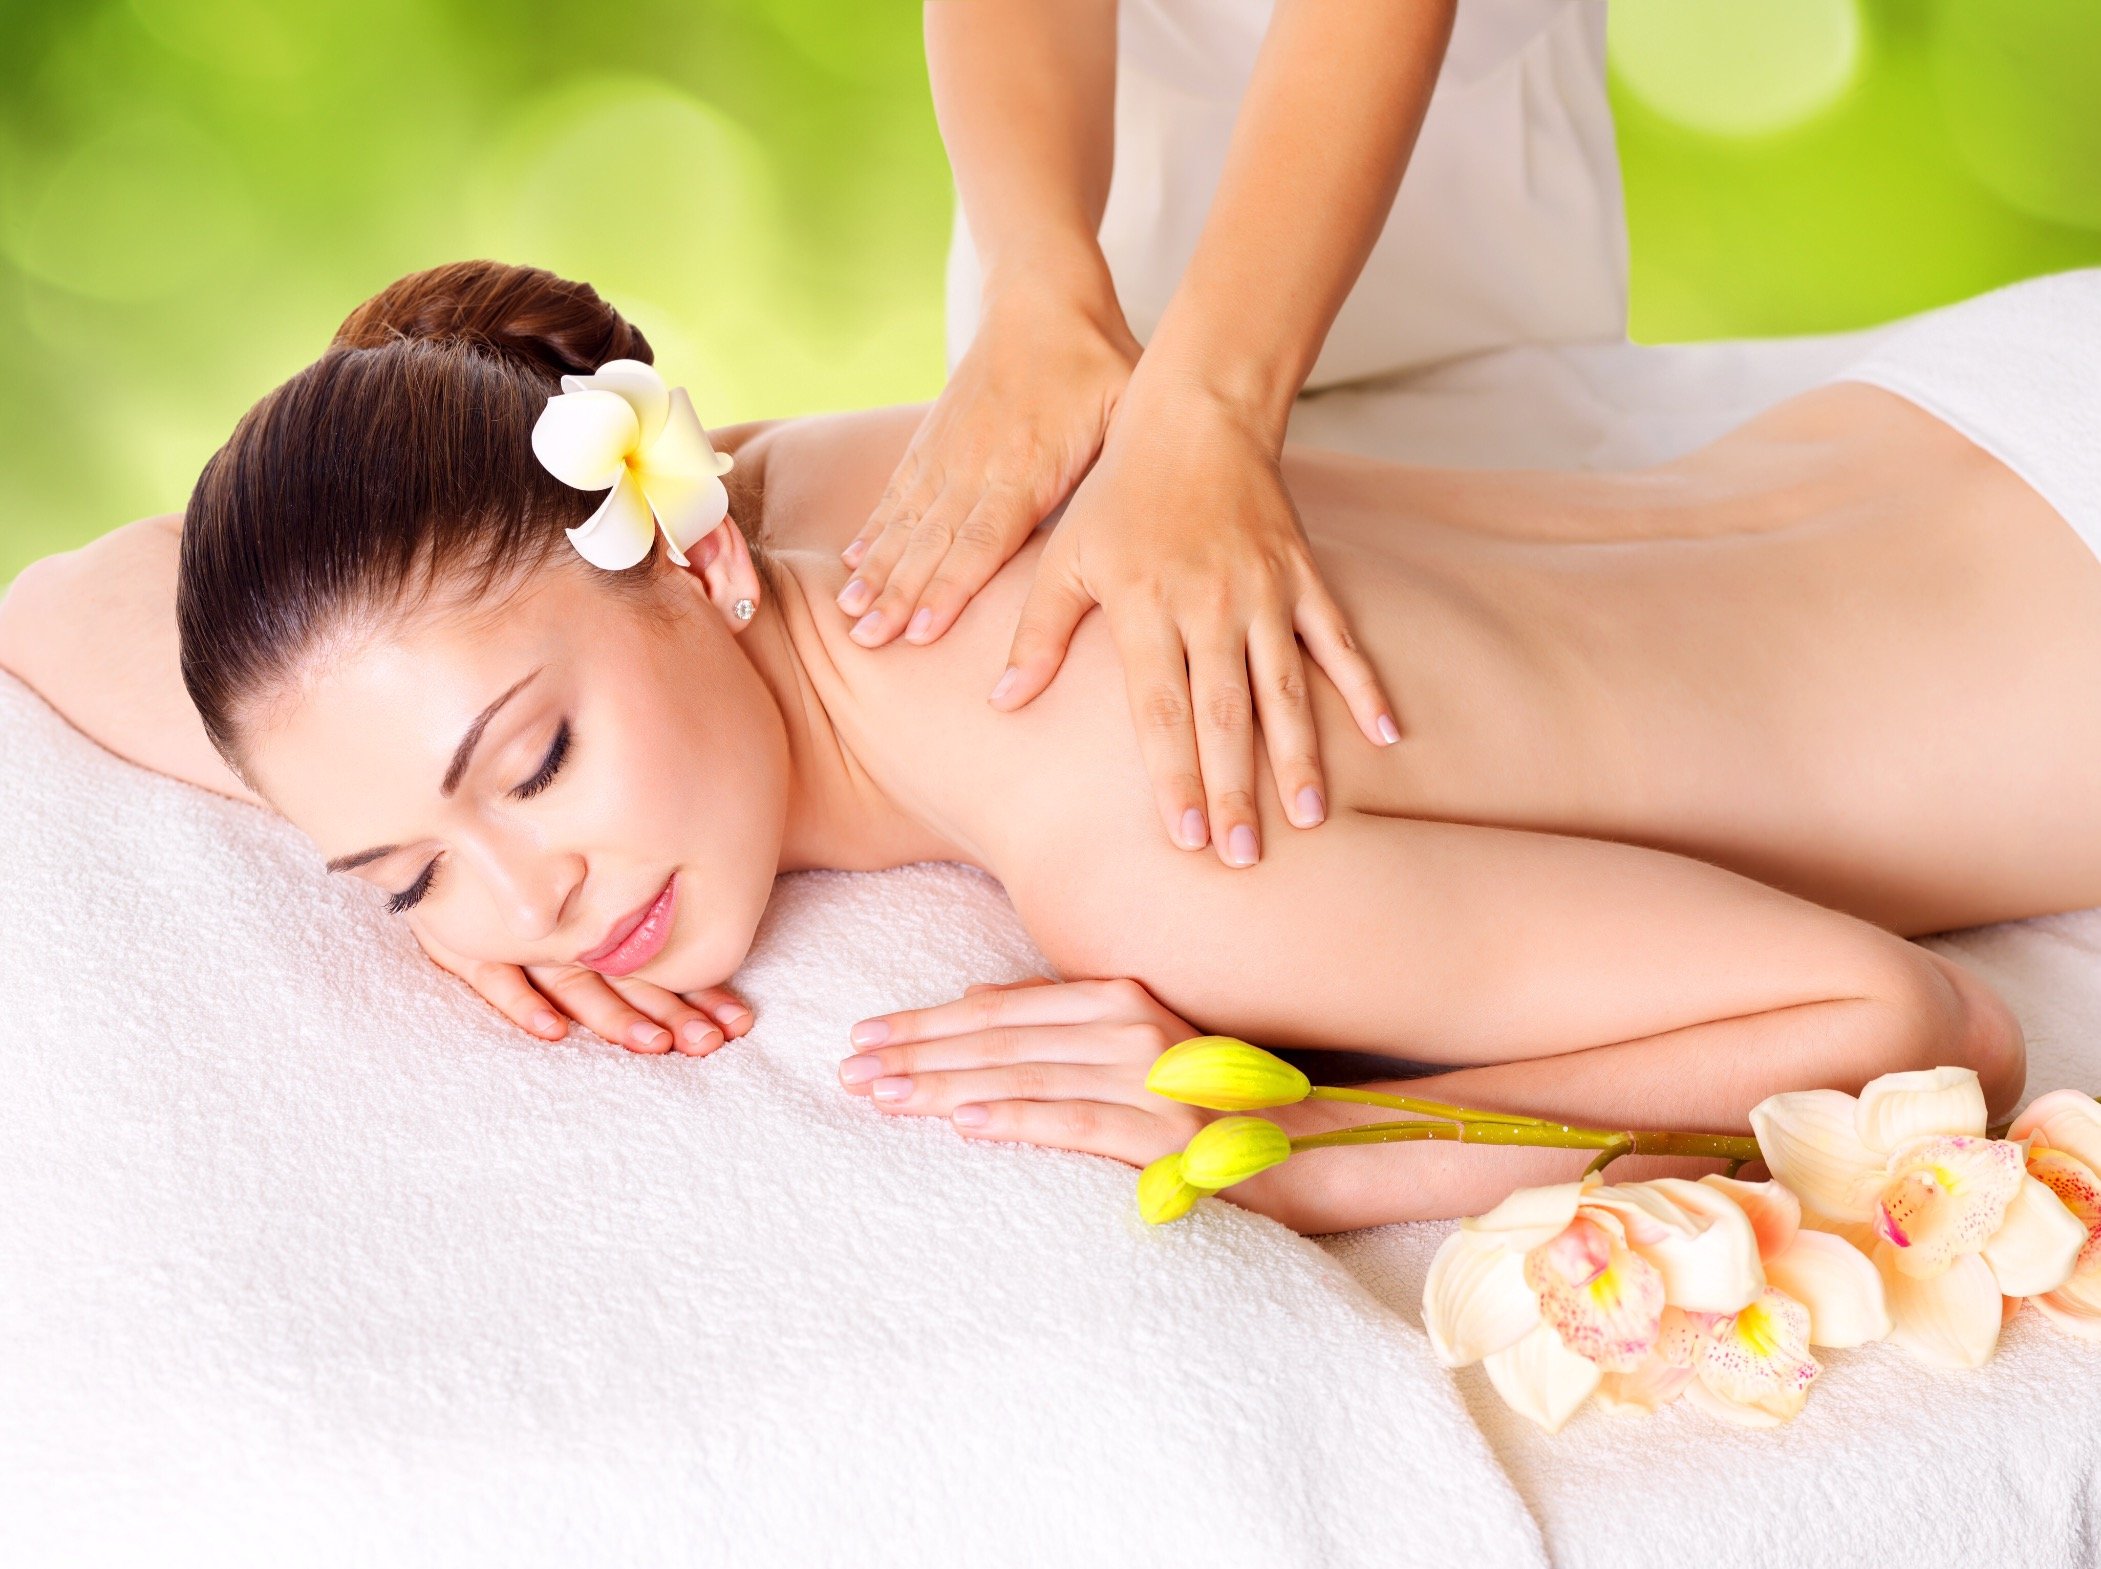 Service list: Specializing Medical Therapeutic Massage Come Here For The Best Heath For You and Your Family